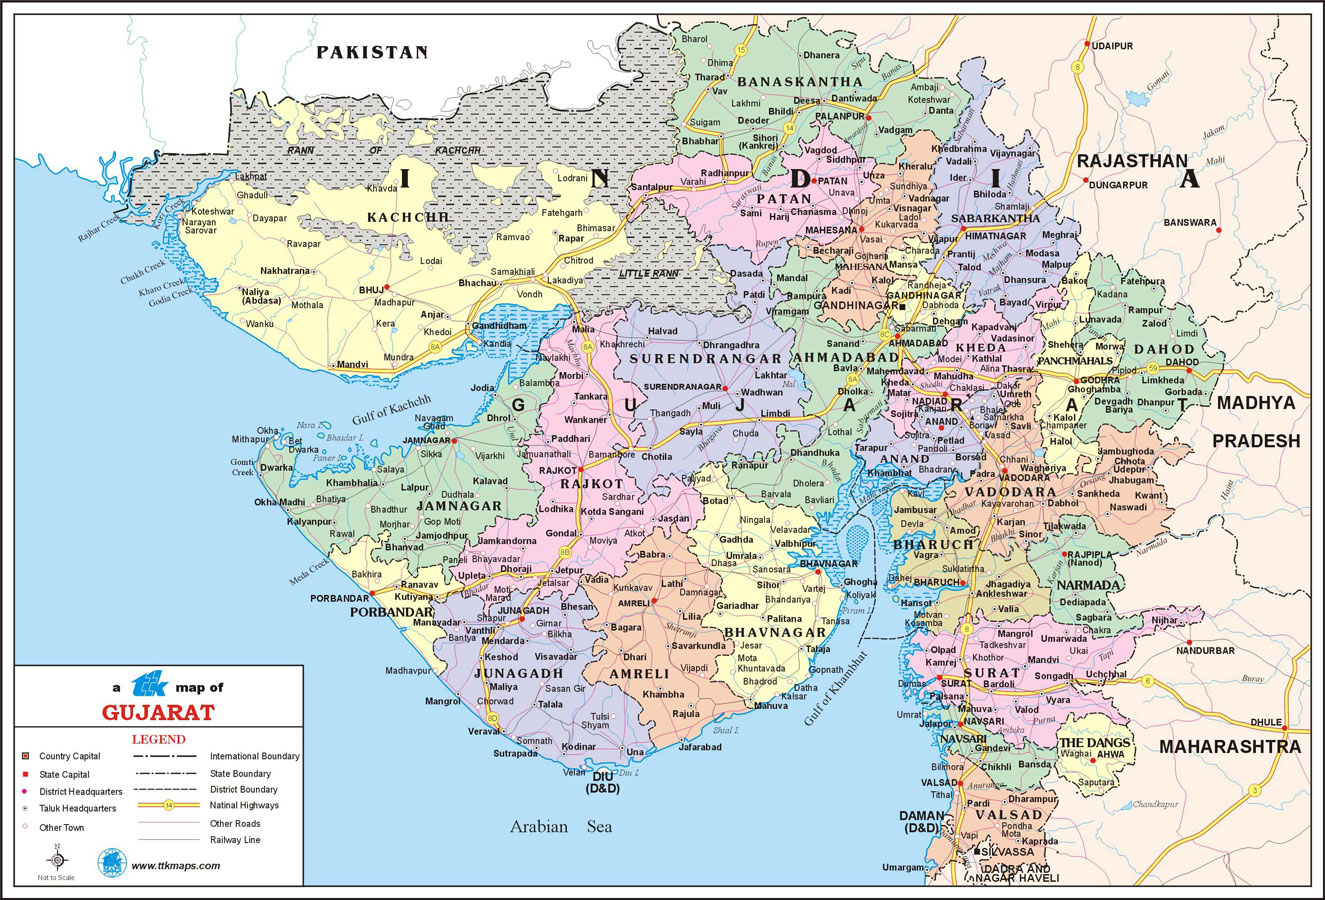 Gujarat Travel Map, Gujarat State Map with districts, cities, towns